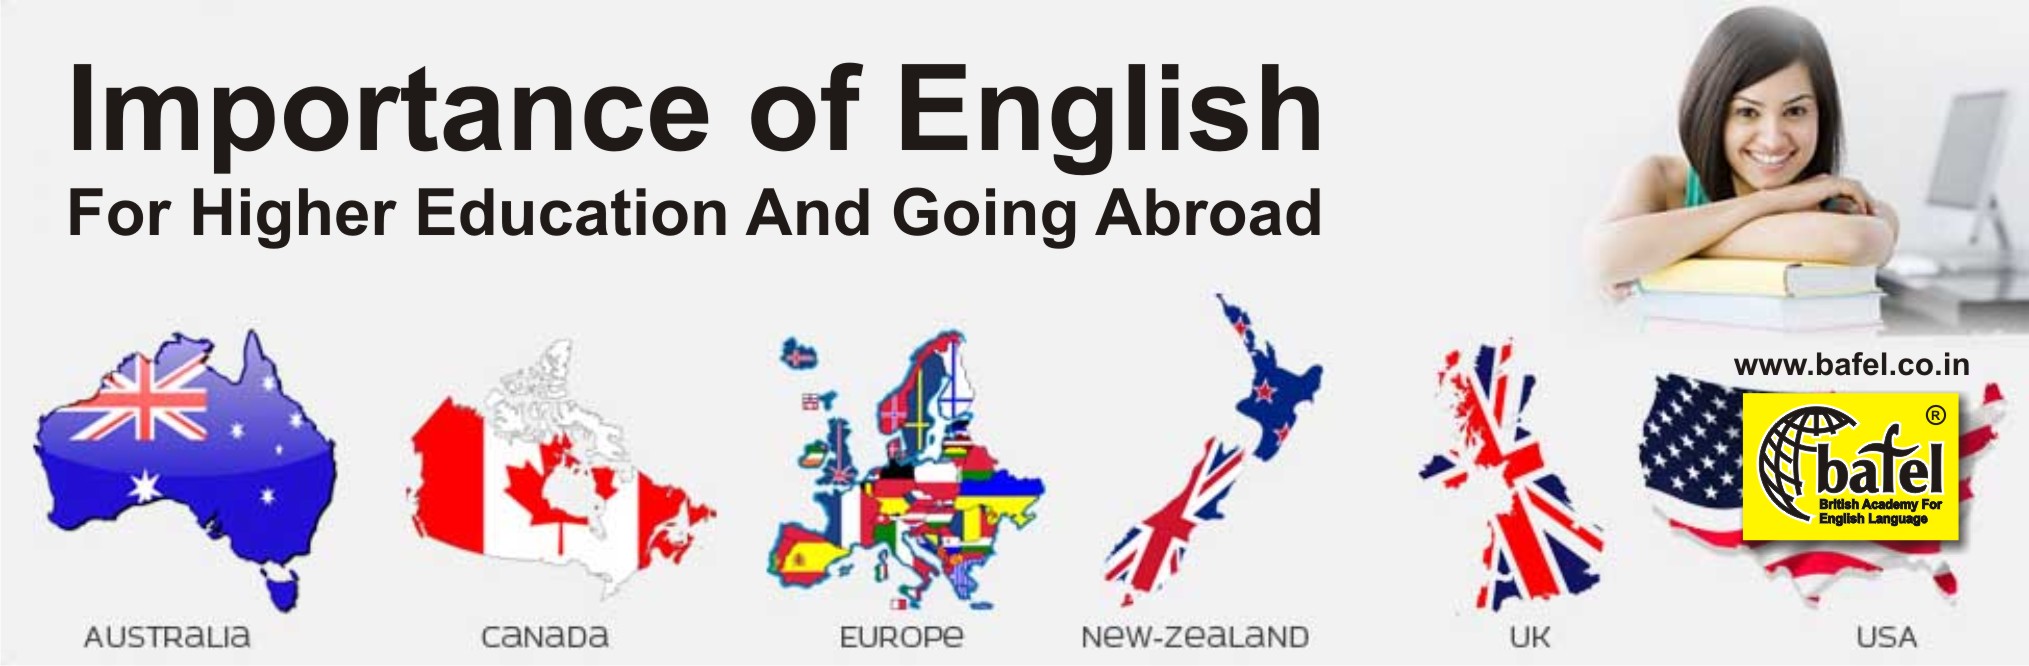 Importance of English for Higher Education And Going Abroad - BAFEL